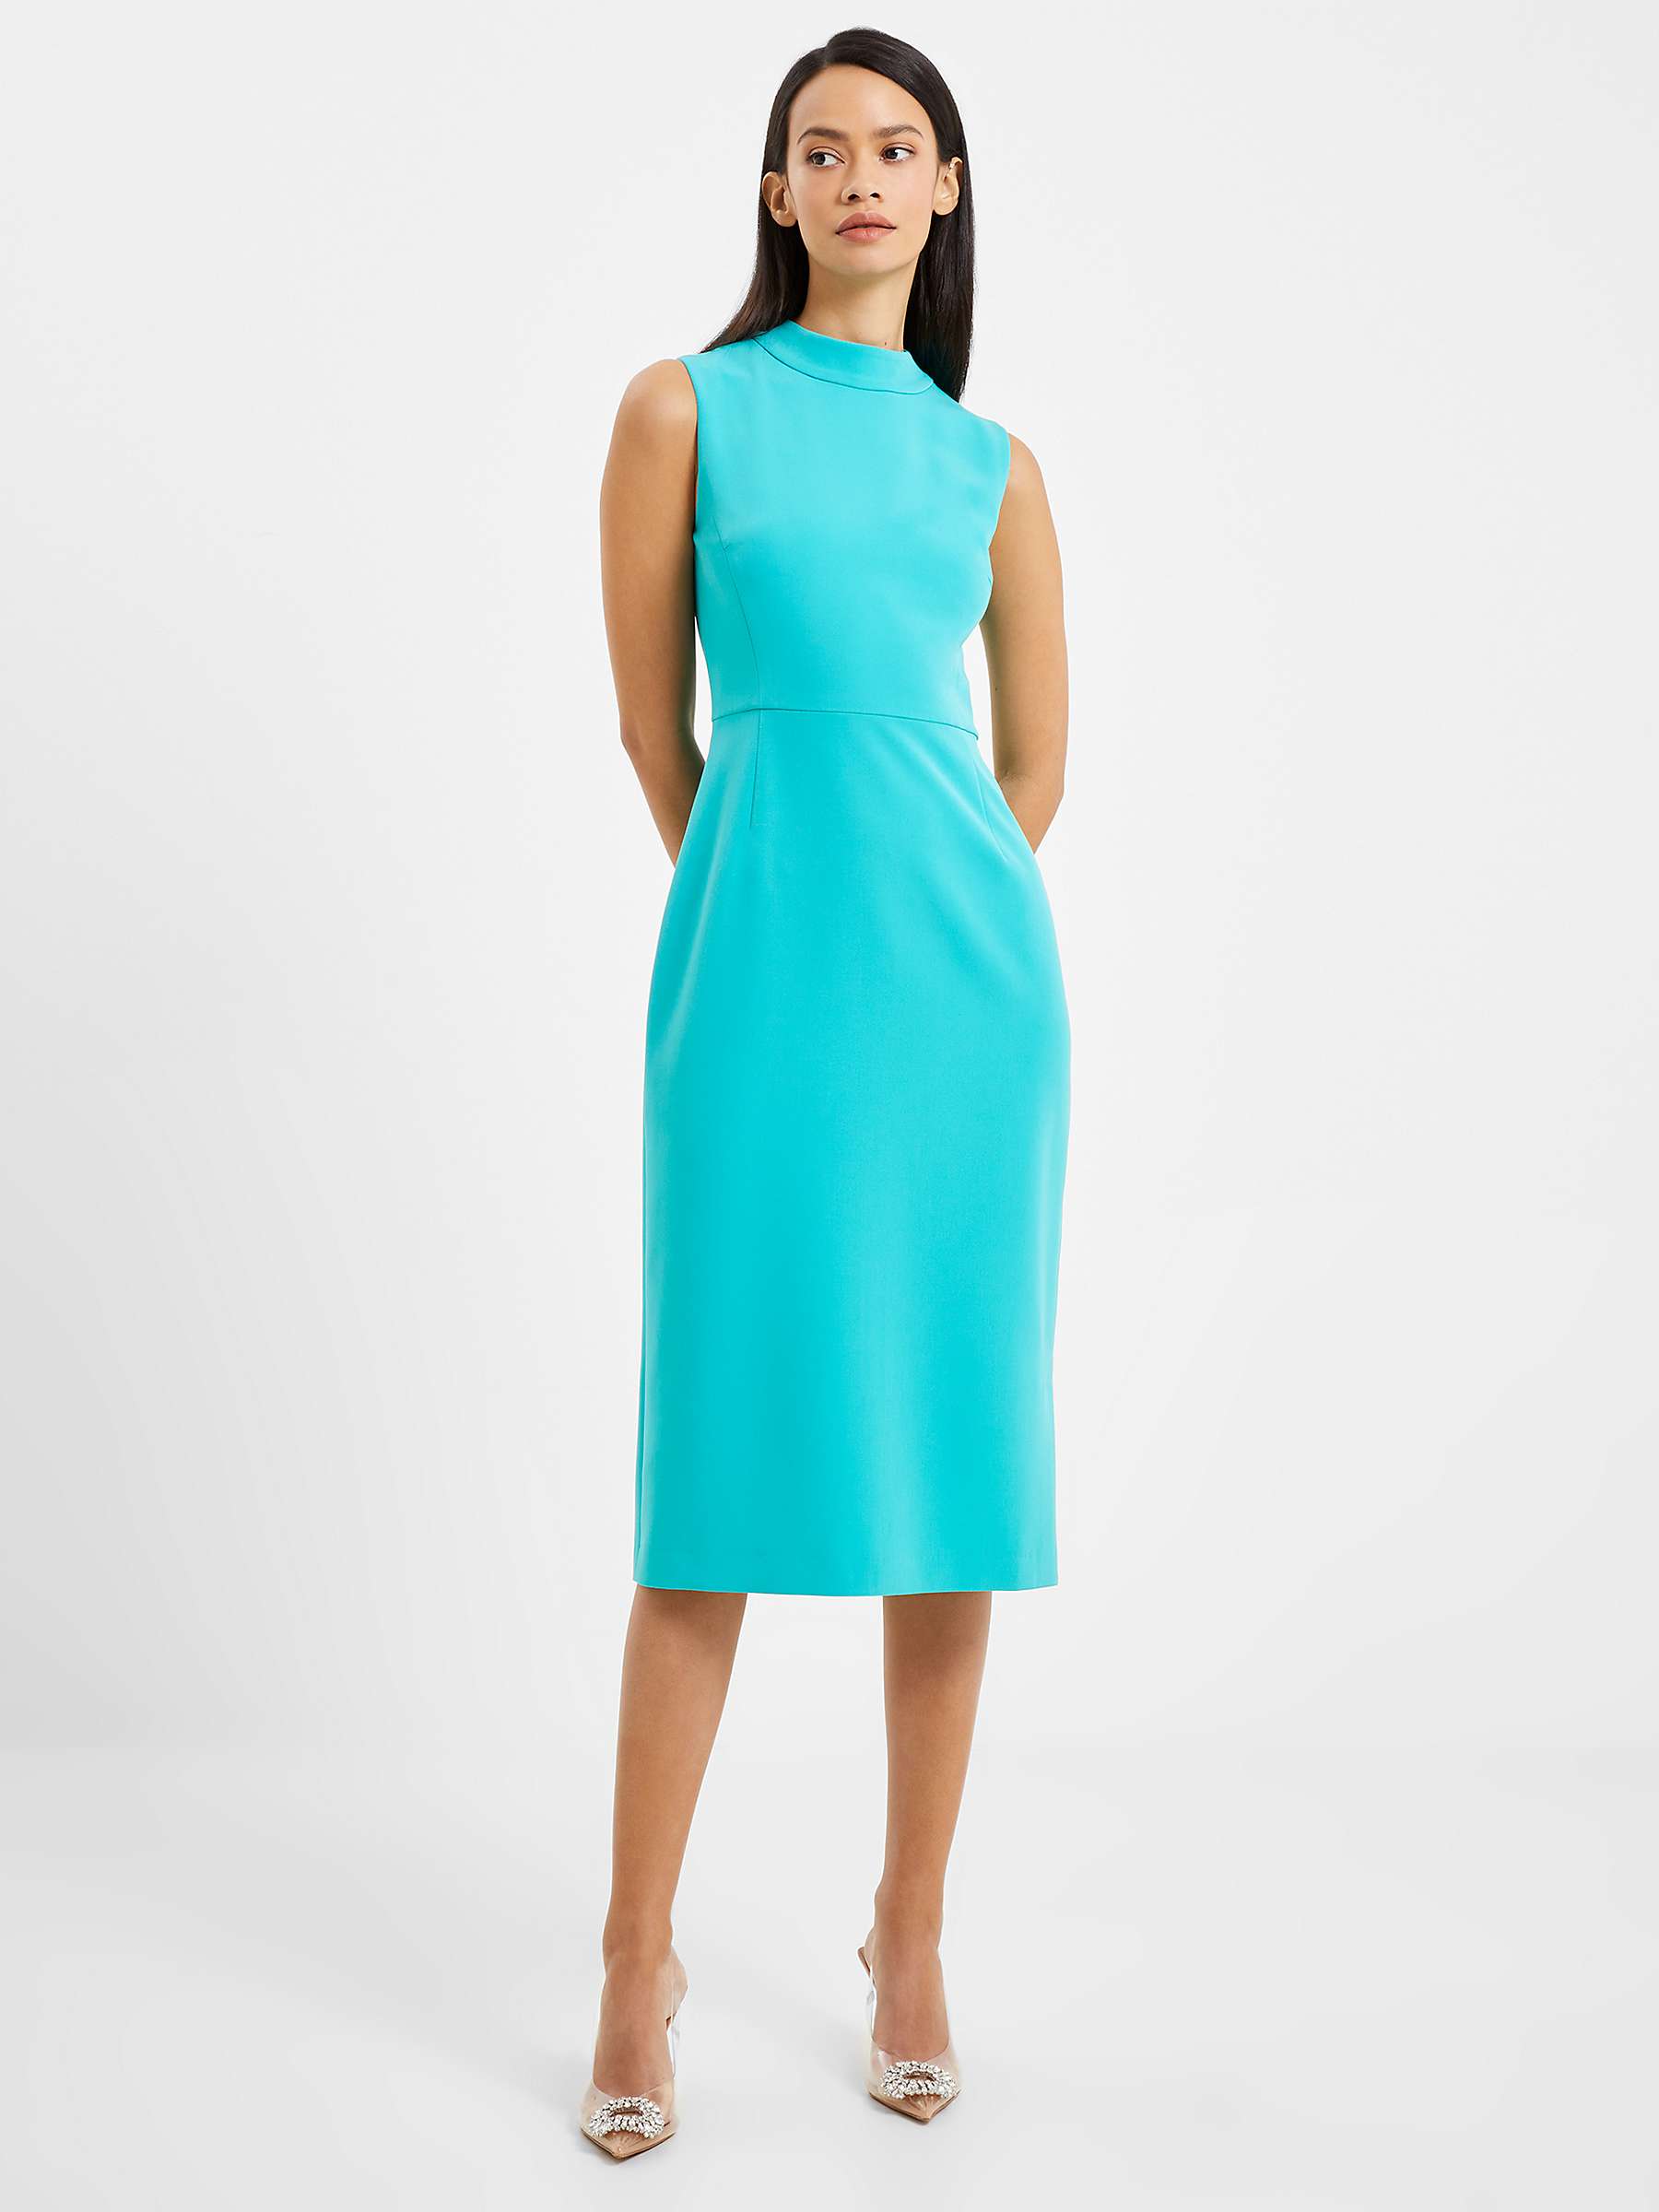 Buy French Connection Echo Crepe Mock Neck Dress Online at johnlewis.com